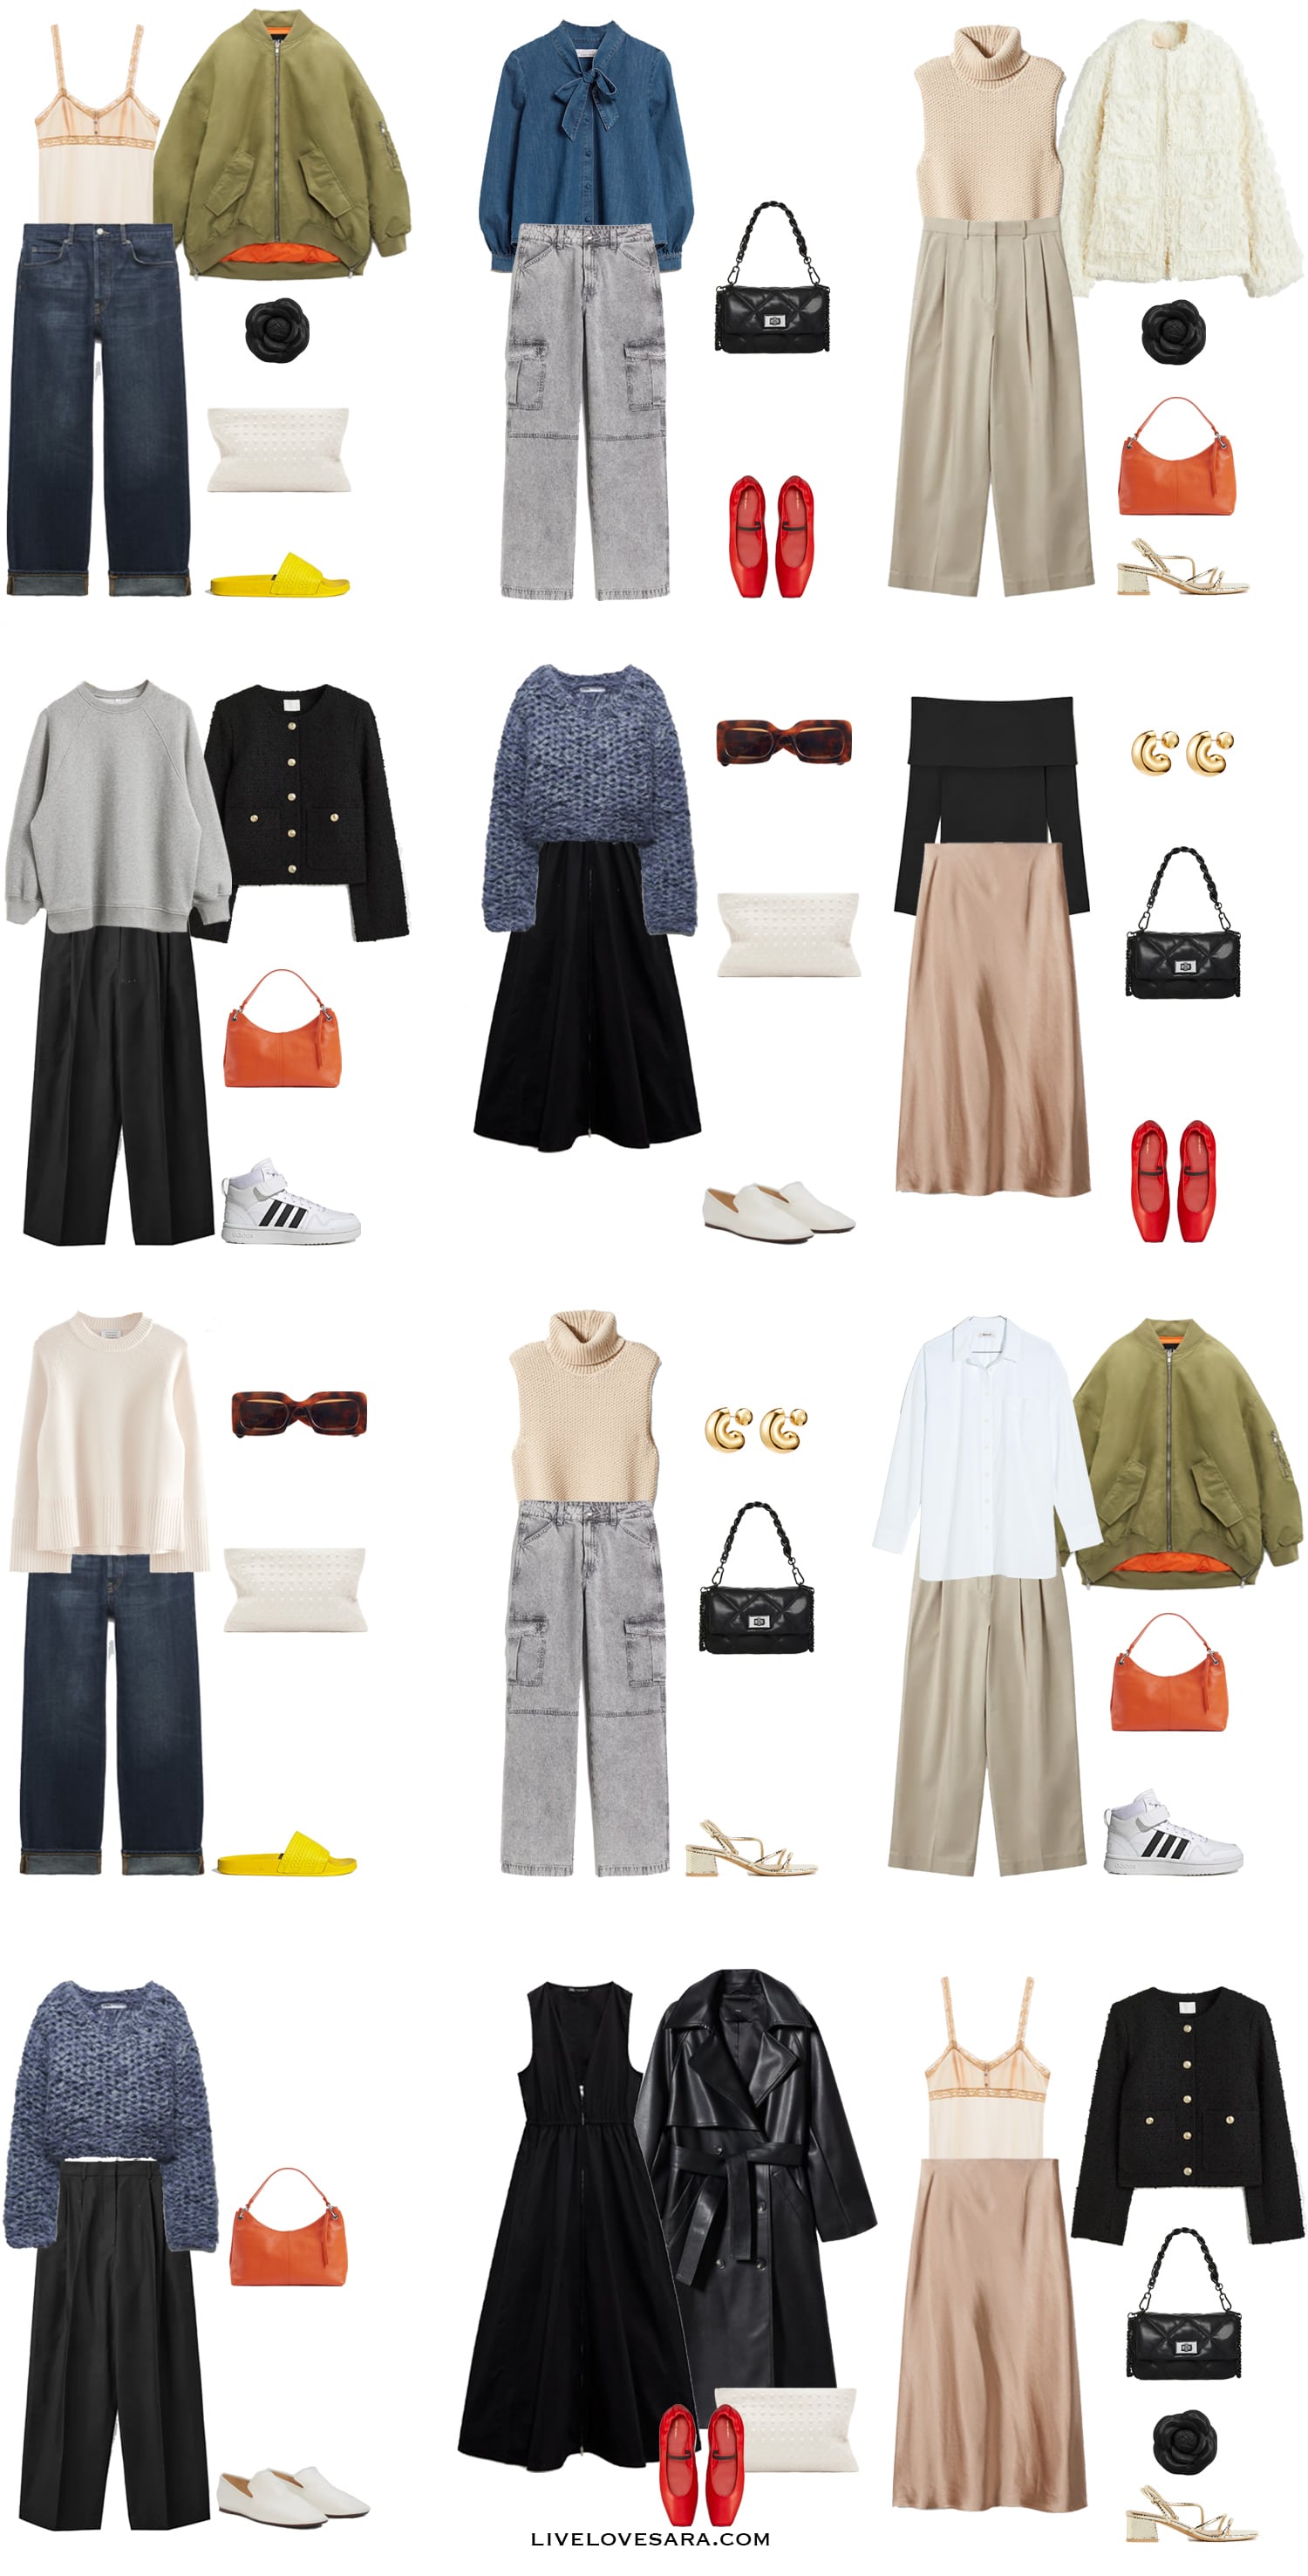 A white background with 12 outfits from Building a Spring Capsule Wardrobe using Your Style Adjectives.